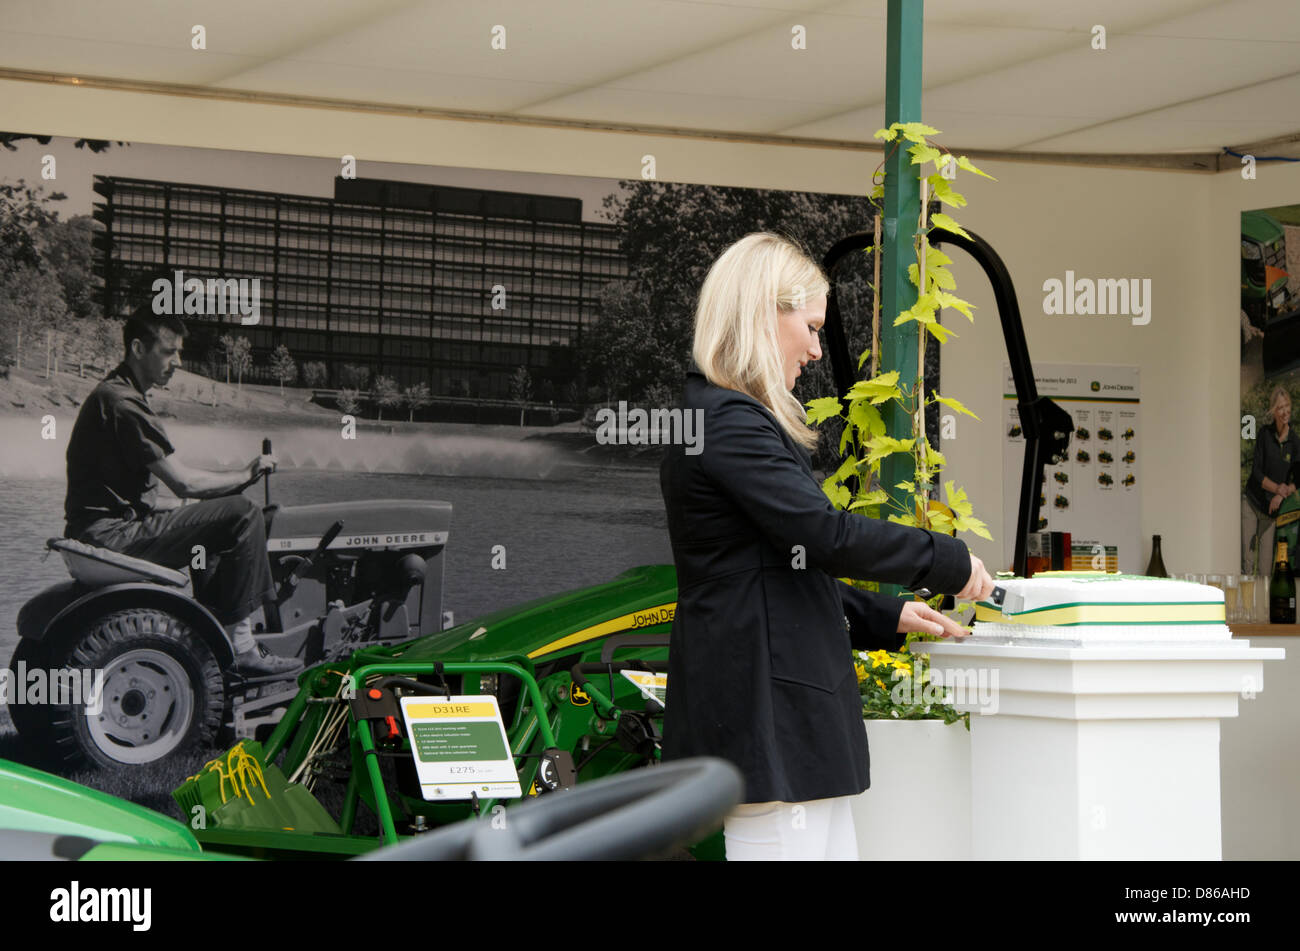 Zara Phillips cuts the cake to celebrate 50 years of John Deere at RHS Chelsea Flower Show, London, UK on Press day 20th May 2013. John Deere began producing lawnmowers and garden tractors in 1963. Stock Photo